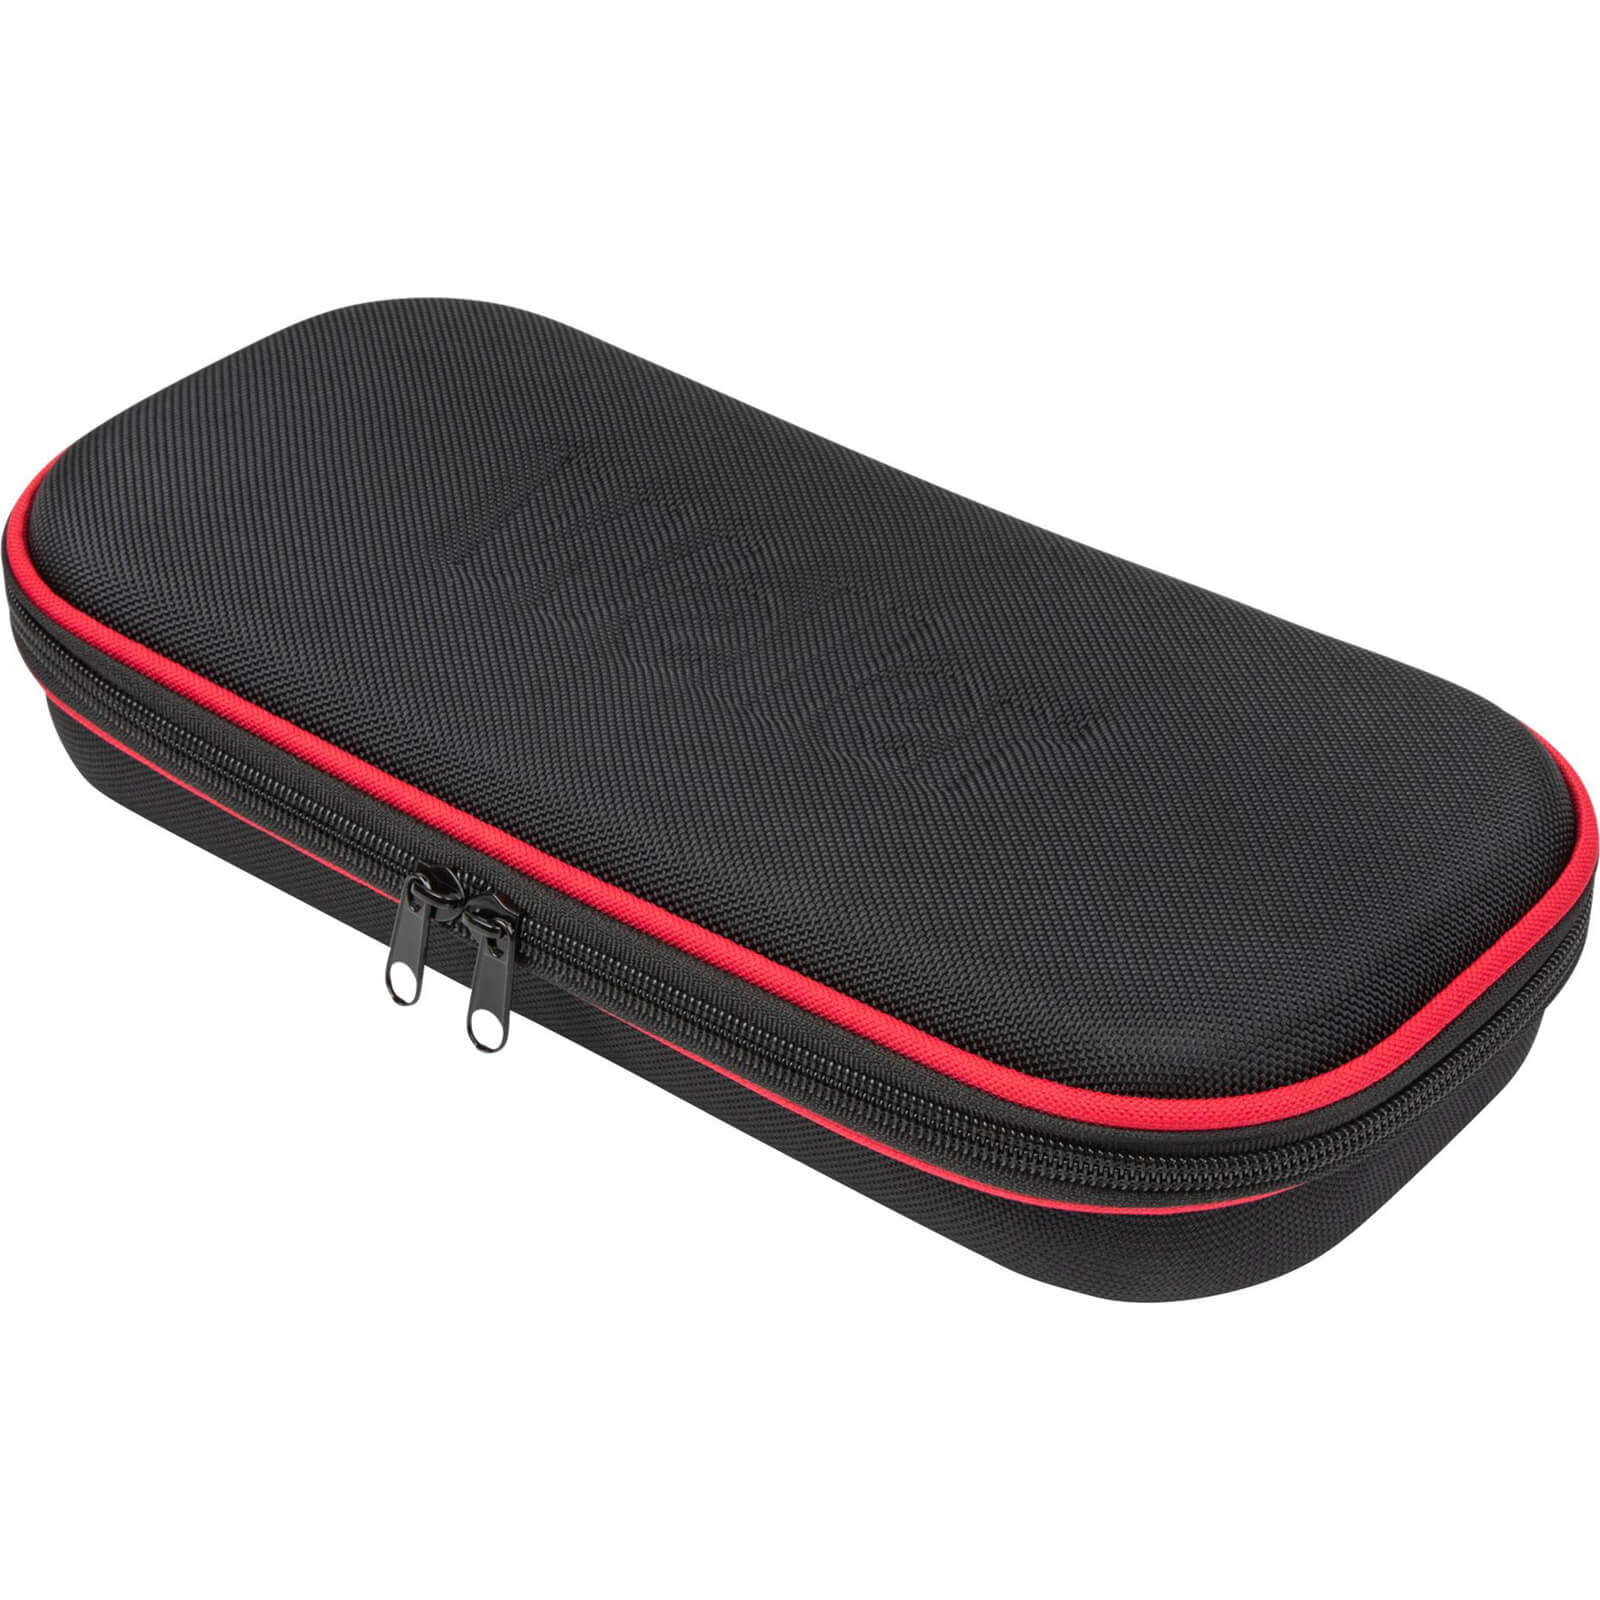 Image of Weller Soft Storage Case for Soldering Irons